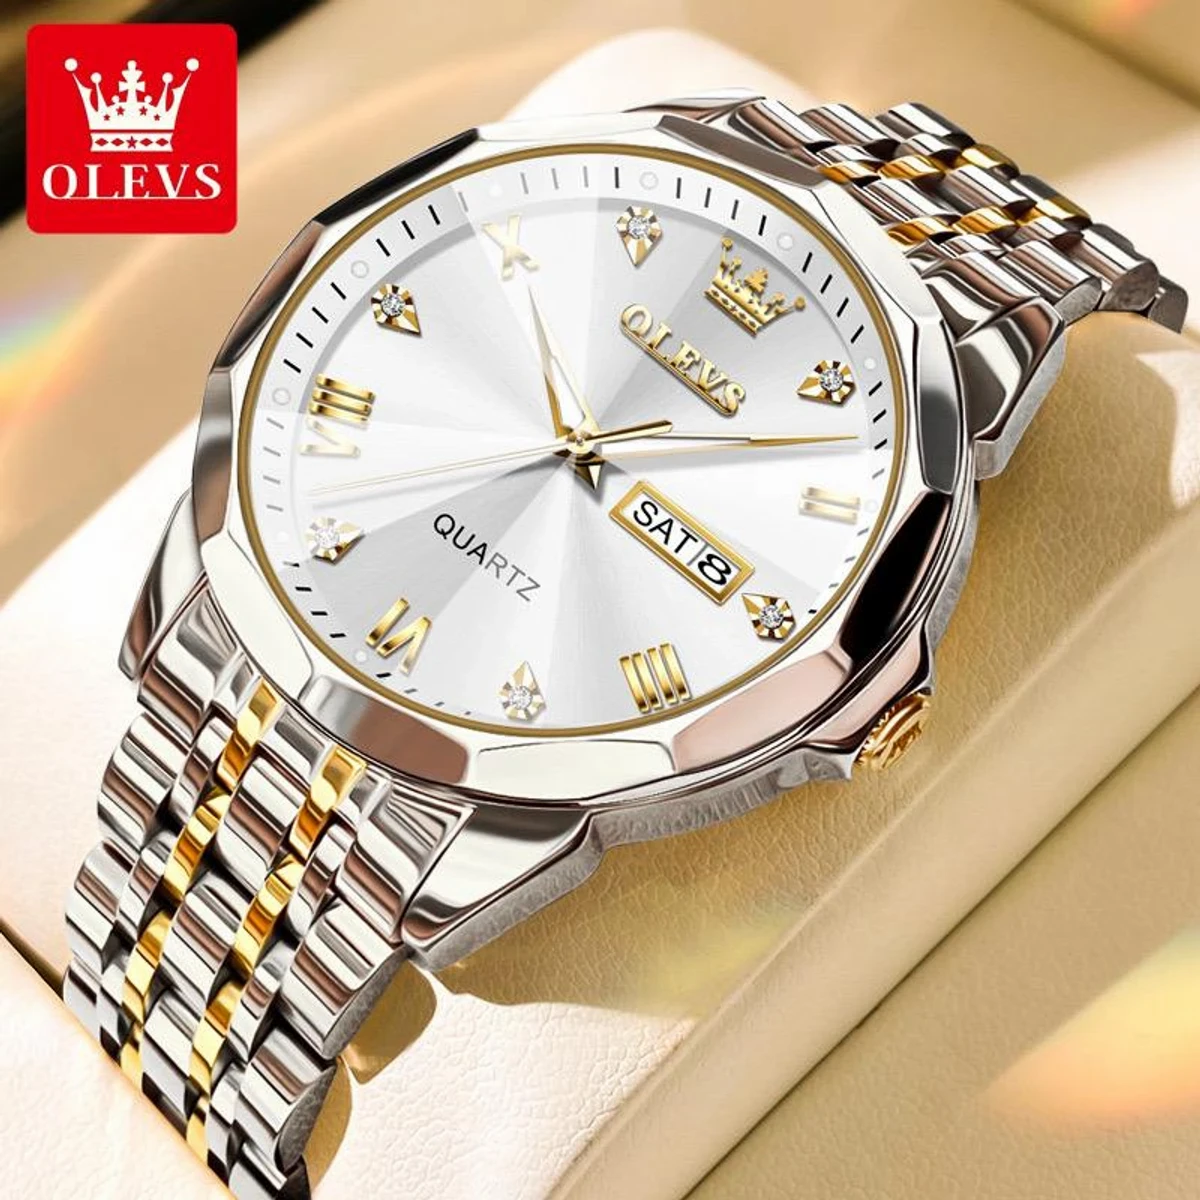 OLEVS MODEL 9931 Watch for Men Stainless Steel Watches - 9941 TOTON AR DIAL WHITE - MAN WATCH - LOCK PUSH